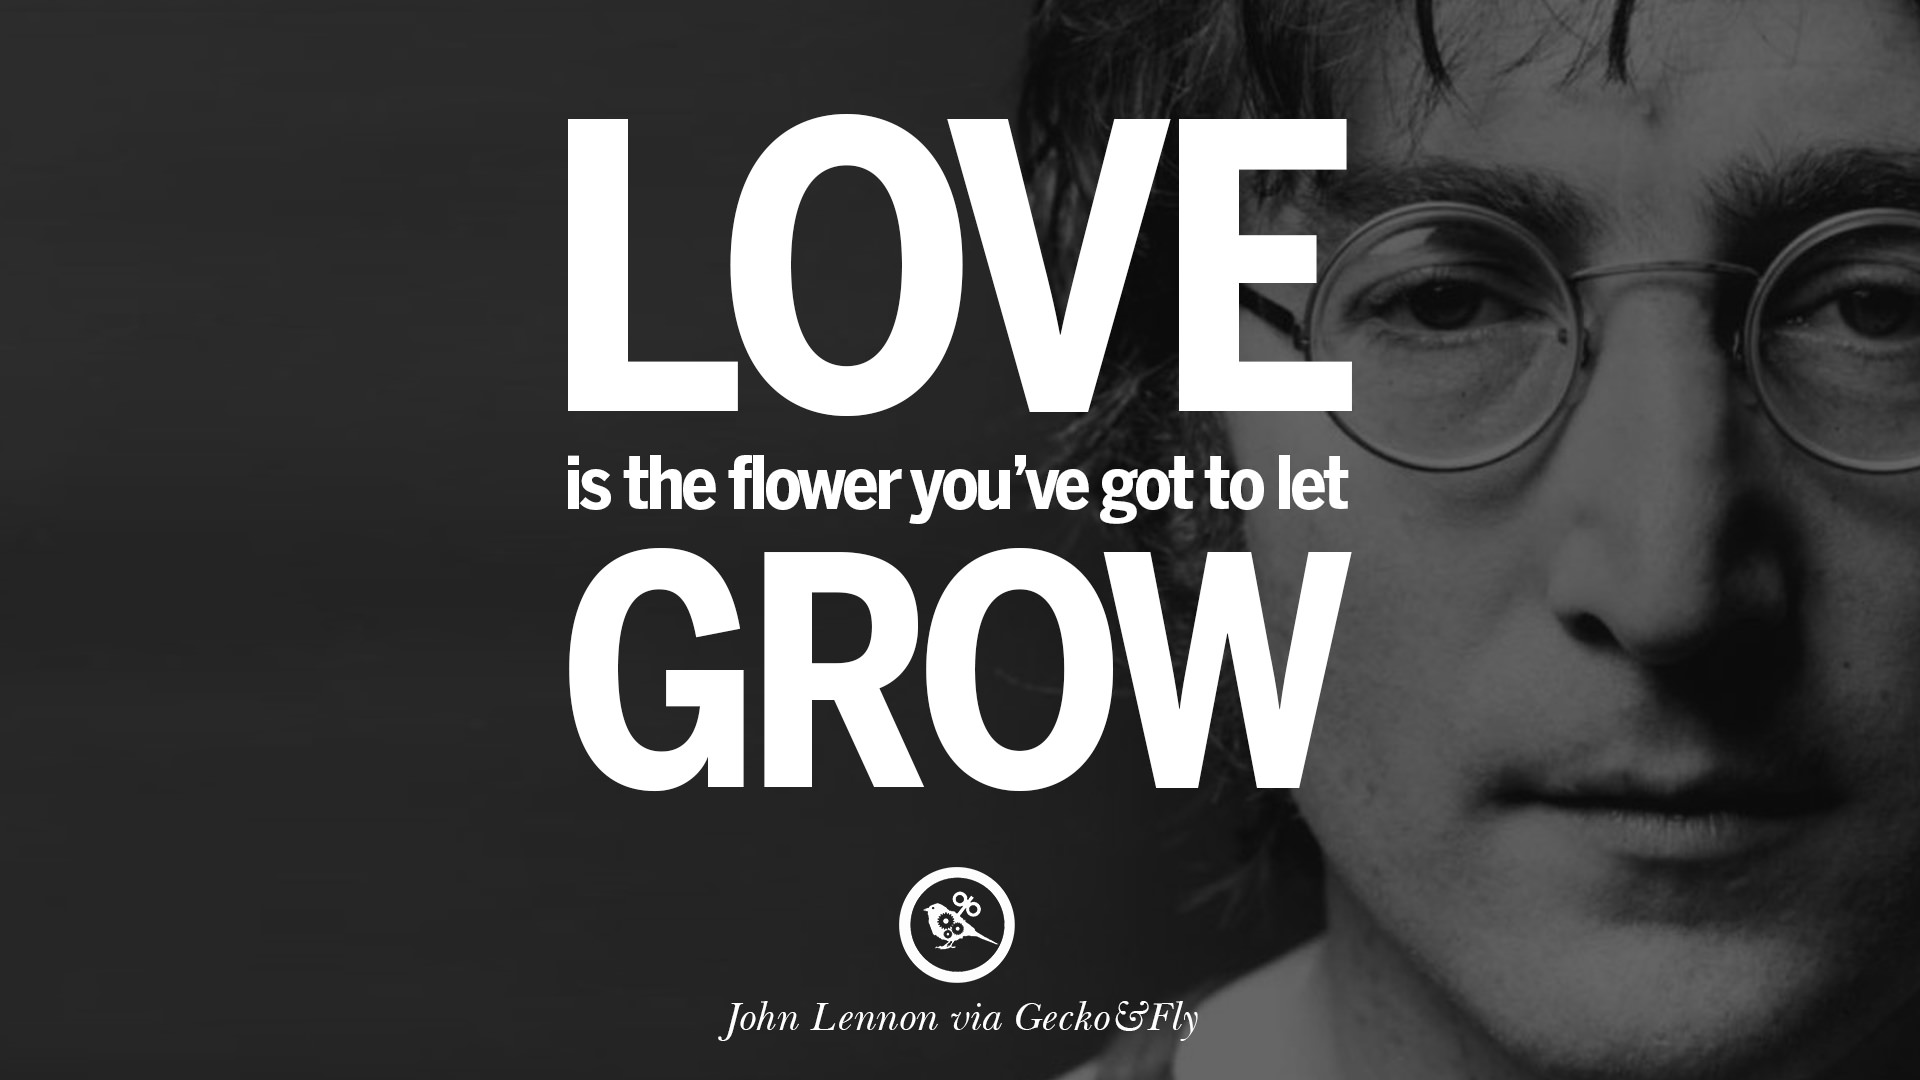 7 John Lennon Quotes About Love